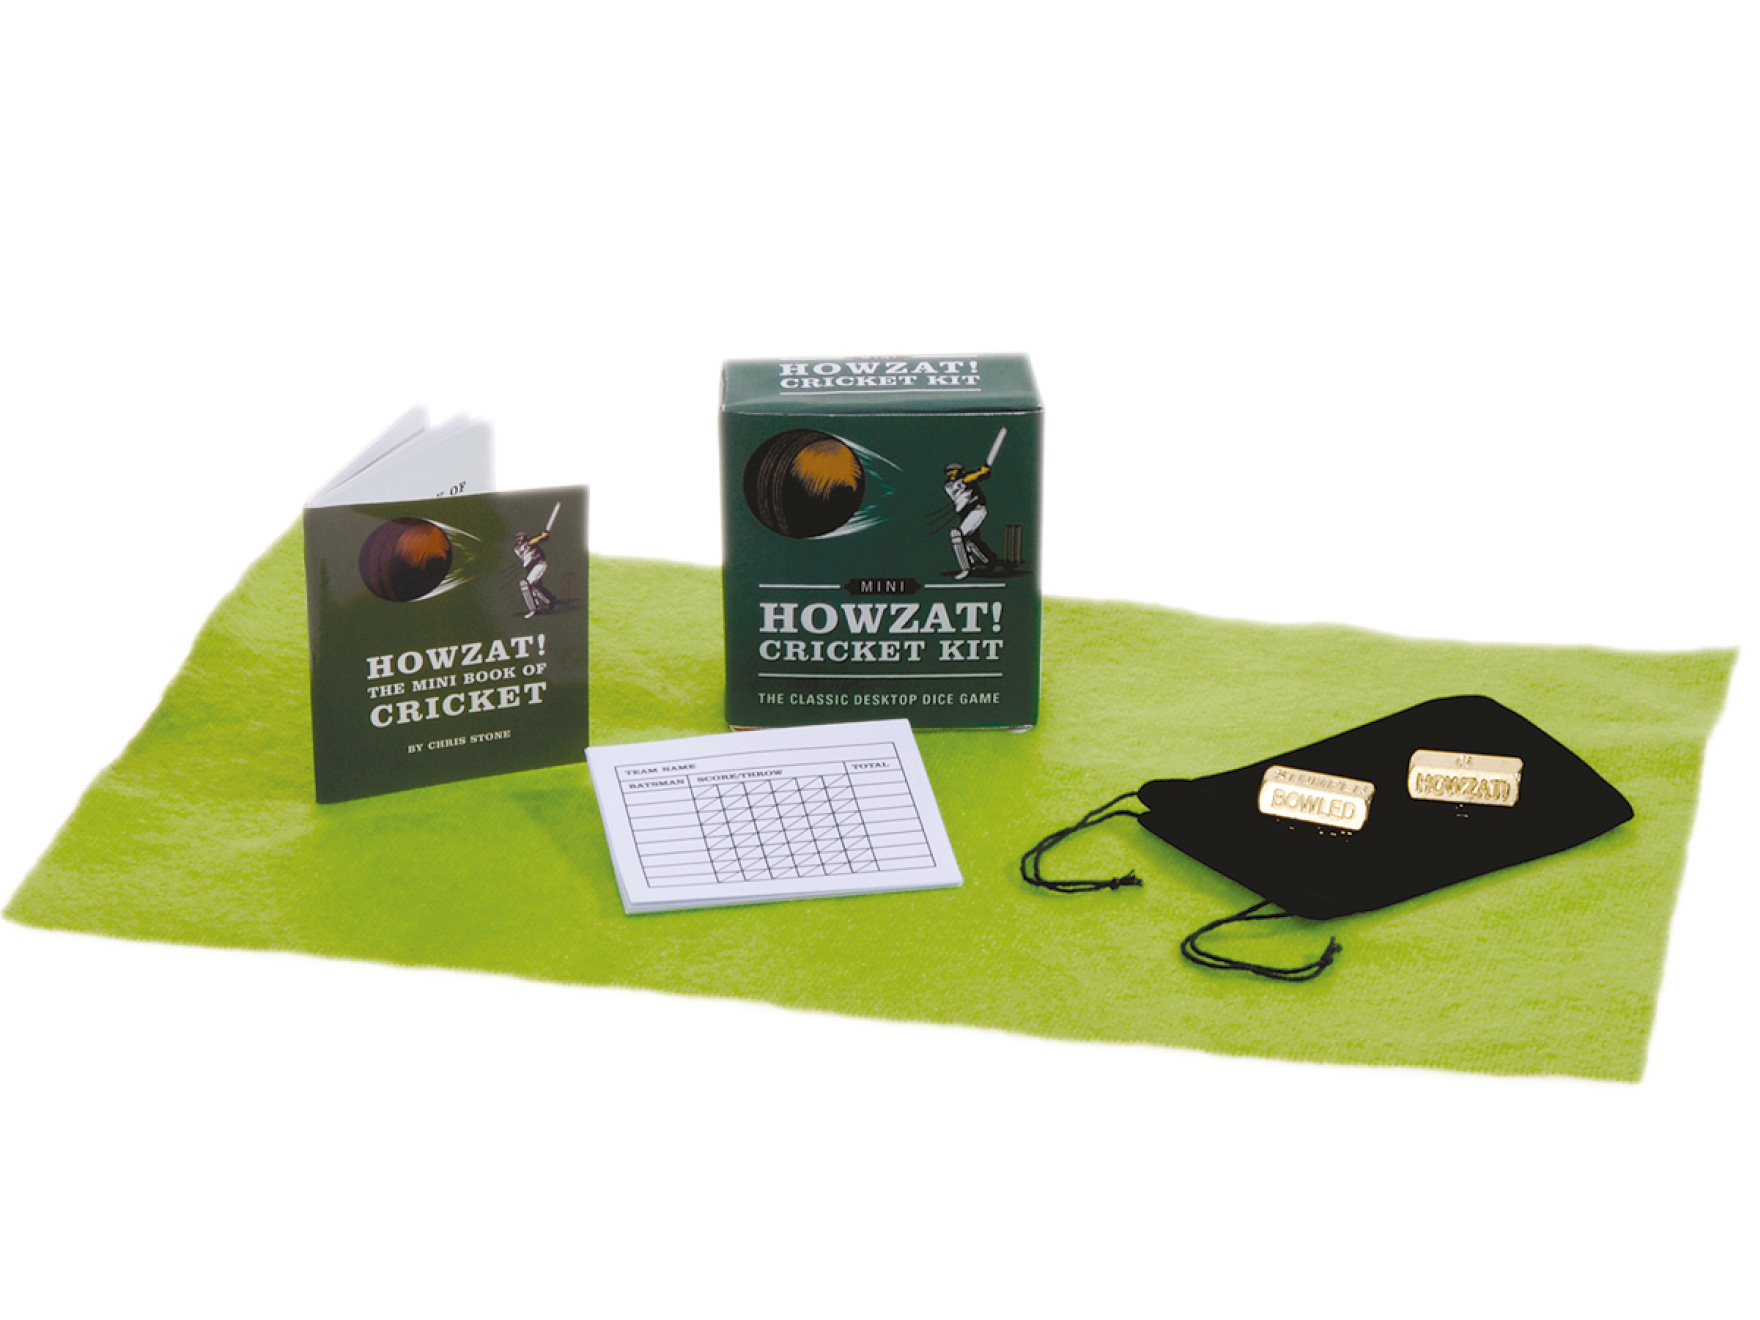 Contents of the Howzat Cricket Mini Kit showing dice, instruction book and score pad